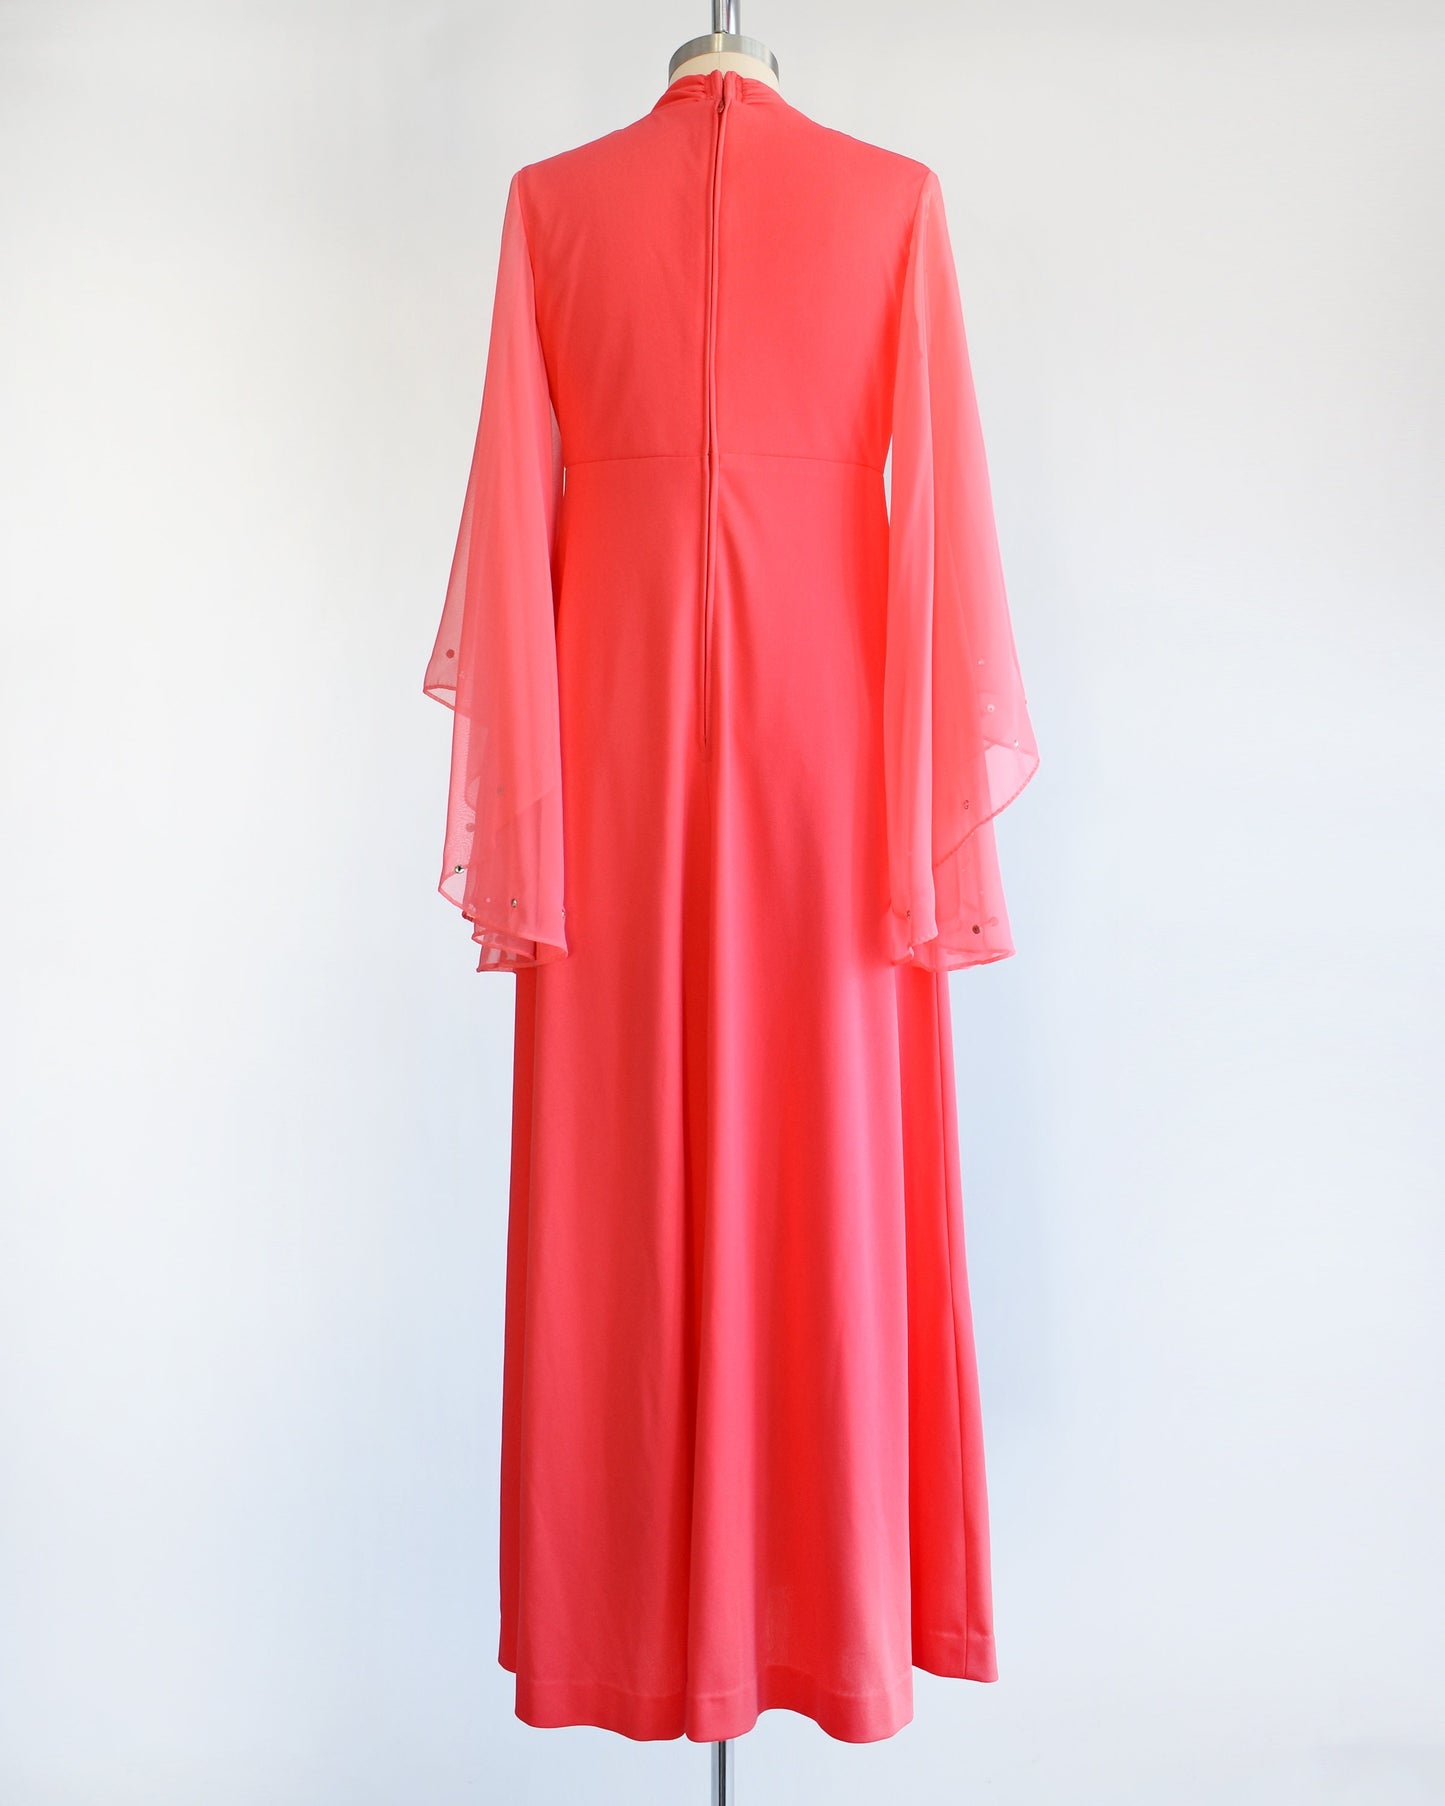 Back view of a vintage 70s coral pink maxi dress that has semi-sheer long angel sleeves with matching rhinestone trim. The dress is modeled on a dress form.